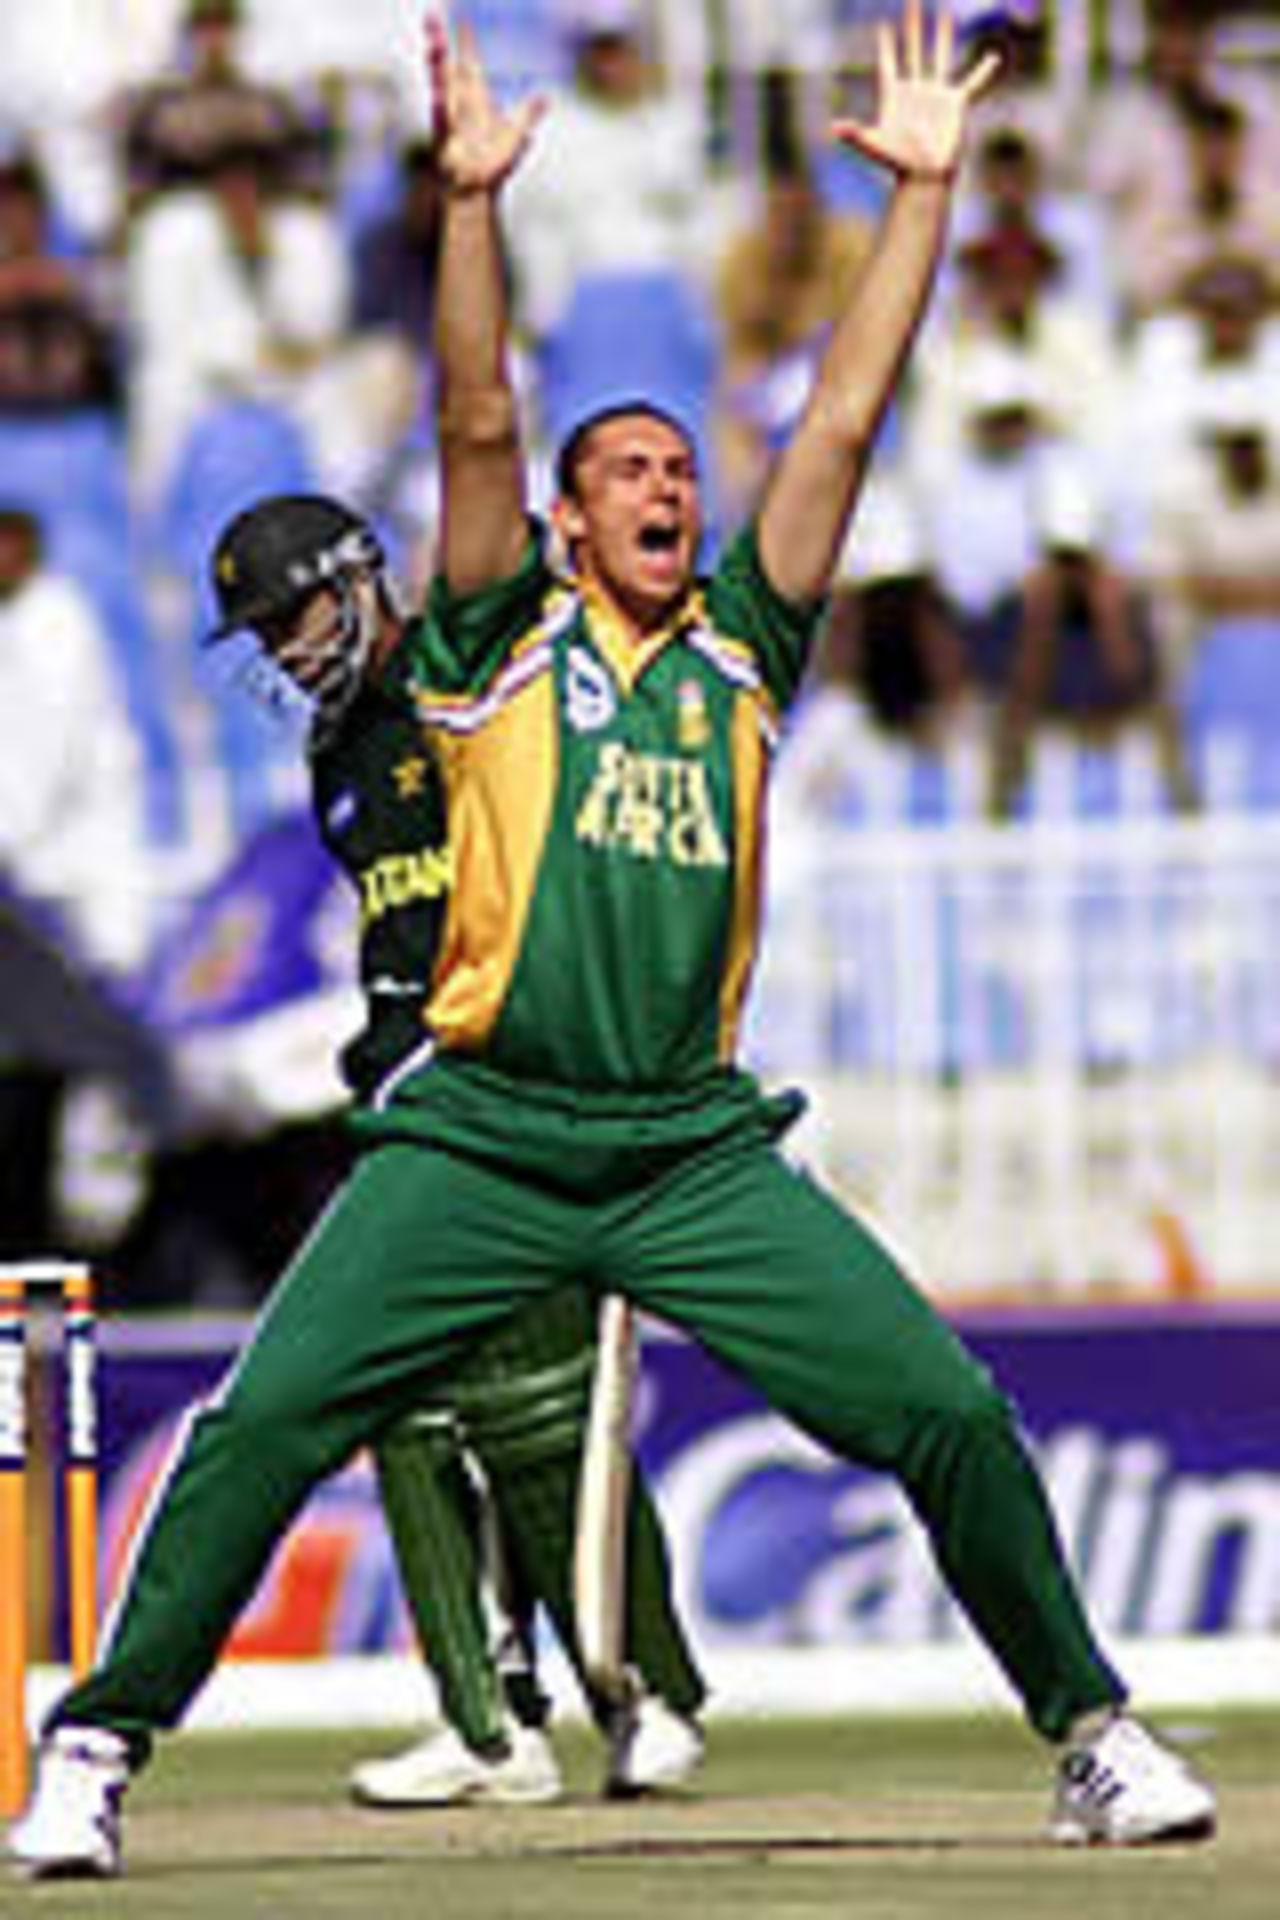 Andre Nel with an unsuccessful lbw appeal against Yousuf Youhana, Pakistan v South Africa, 5th ODI, Rawalpindi, October 12, 2003.